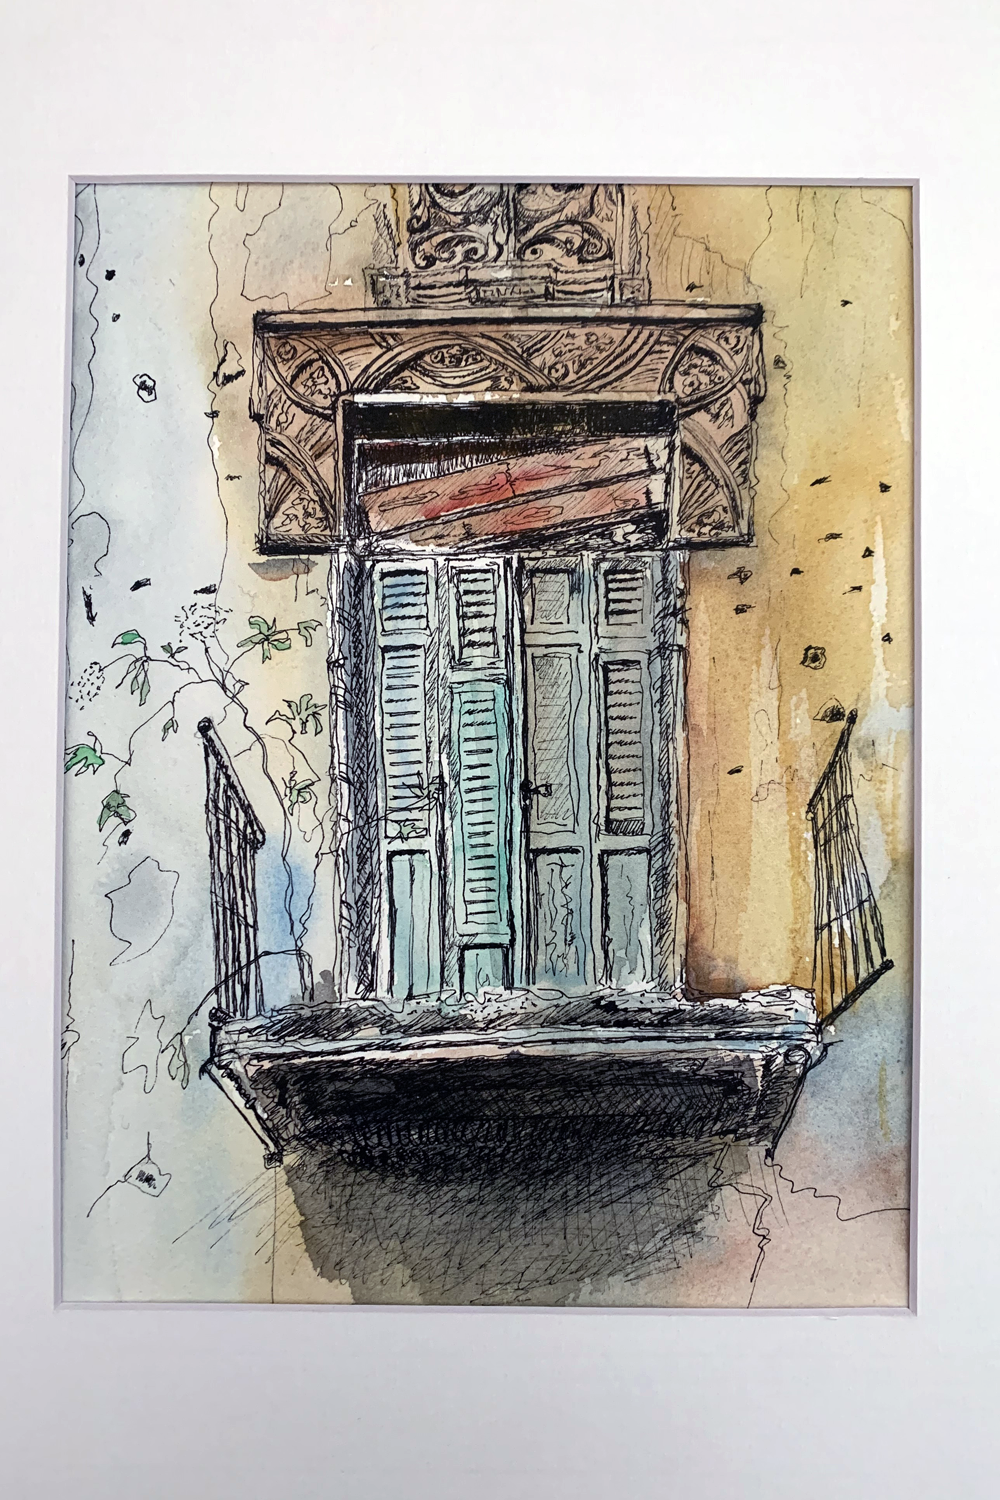 Resilience and Beauty in Imperfection: Watercolor Painting of a Broken Door in Beirut 22X30